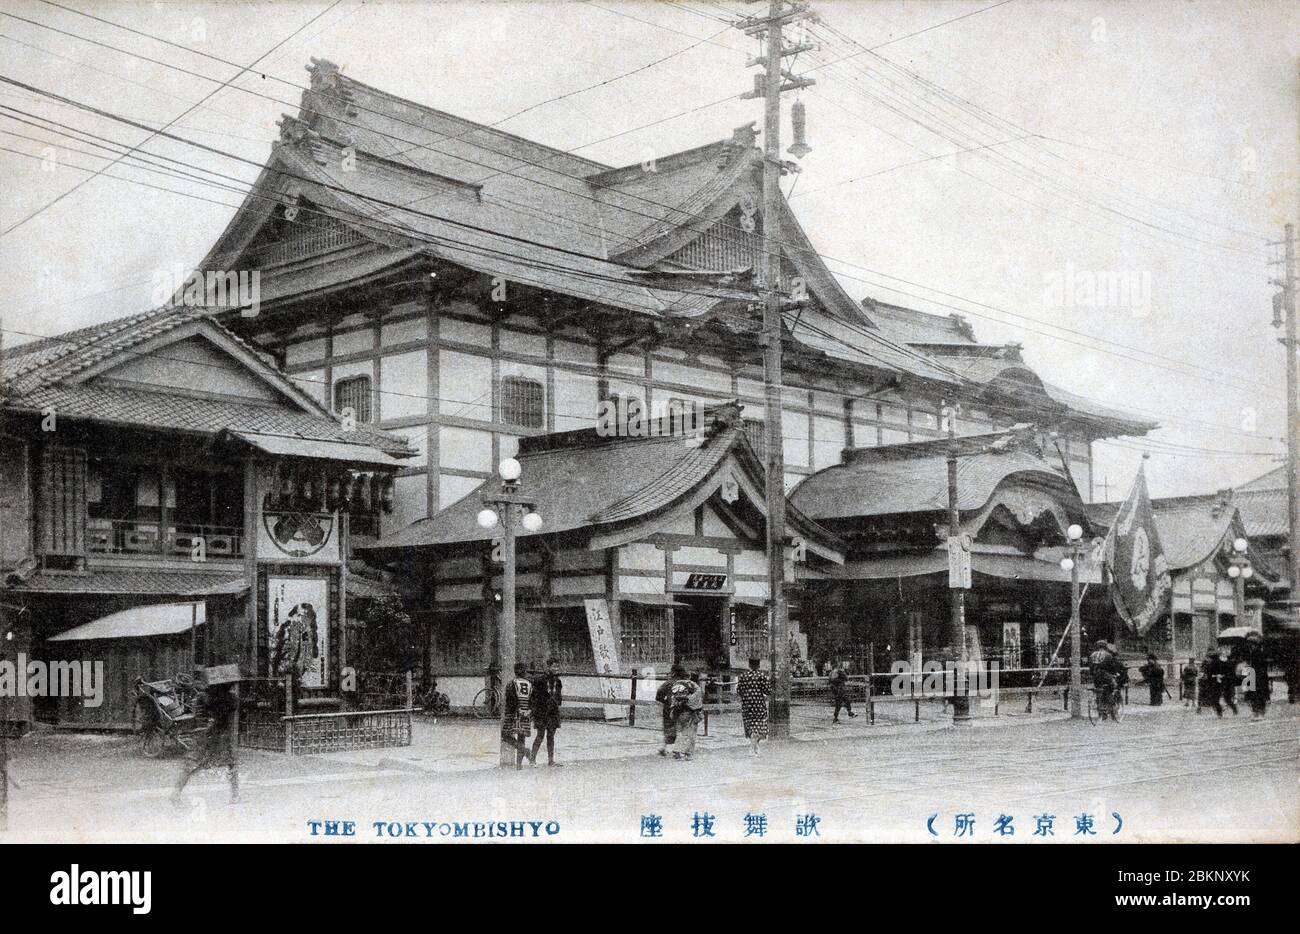 [ 1910s Japan - Tokyo Kabuki Theater ] —   Kabukiza, a theater for kabuki performances, in Ginza, Tokyo.  The original Kabukiza was established in 1889 (Meiji 22). It was replaced with the building on this image in 1911 (Meiji 44). This structure was destroyed by fire in 1921 (Taisho 10), after which a new building was built in baroque Japanese revivalist style. This was demolished in 2010 (Heisei 22) to make way for a larger modern structure.  20th century vintage postcard. Stock Photo